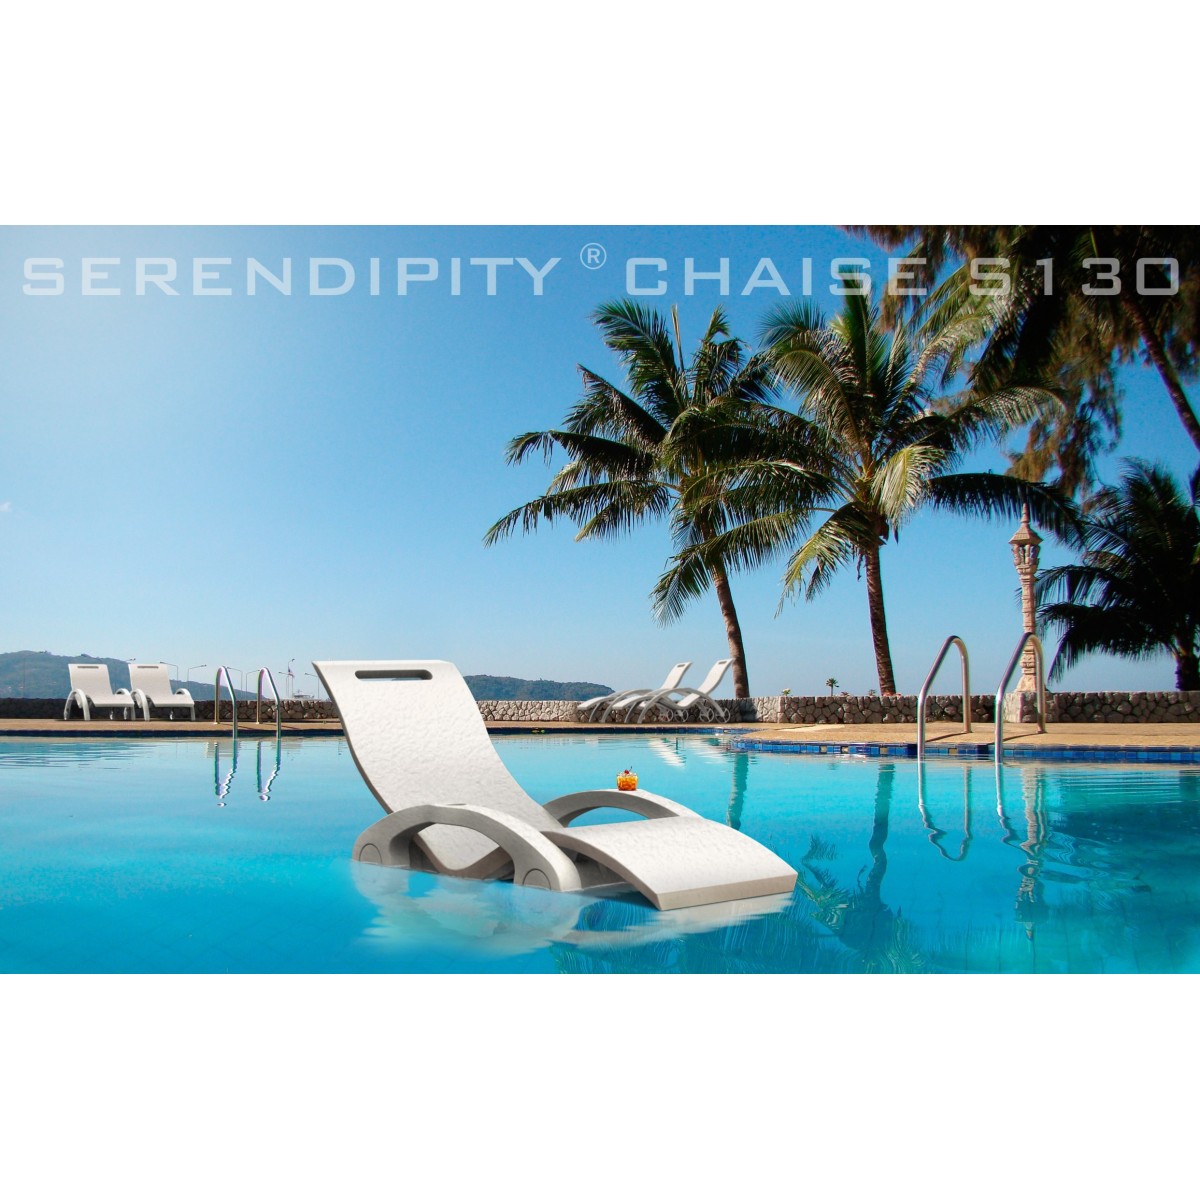 Floating Serendipity Chaise